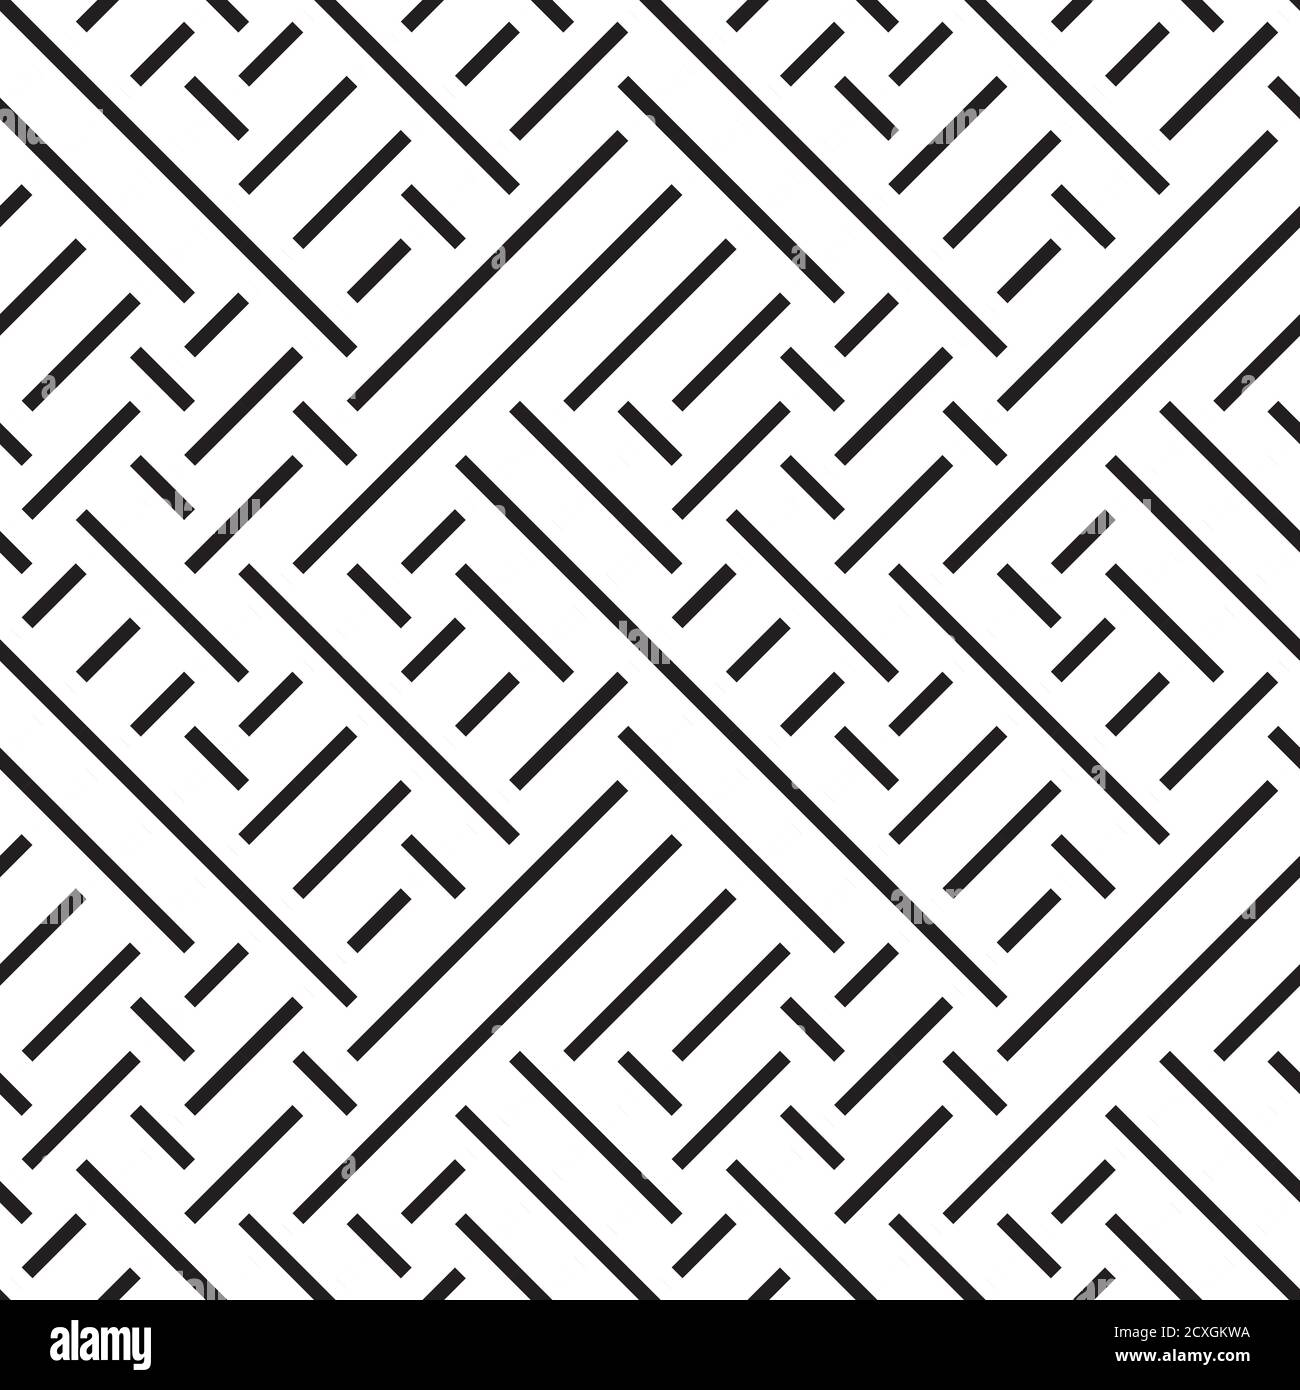 Seamless pattern with oblique black segments Stock Vector